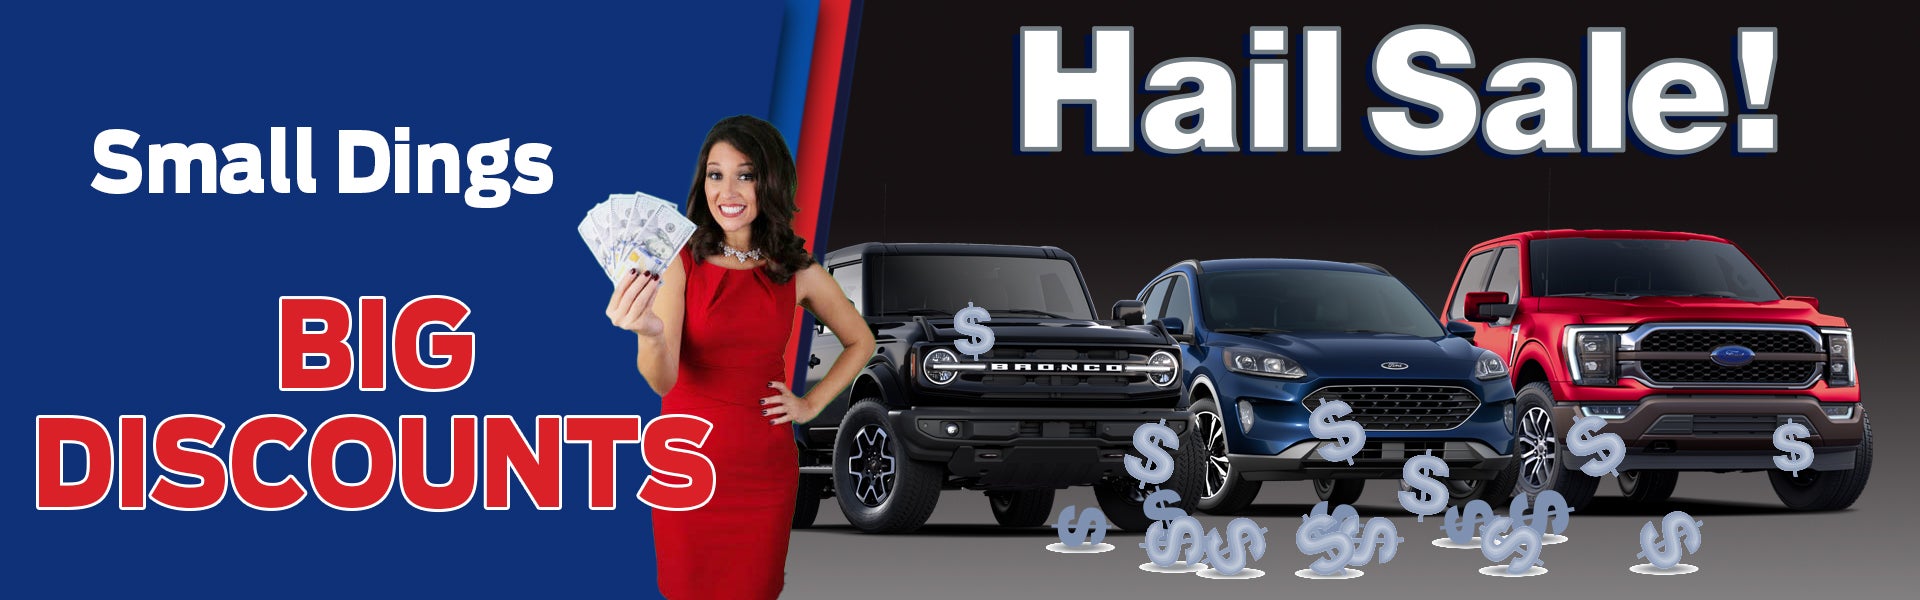 Hail Sale: Big discounts for small dings.